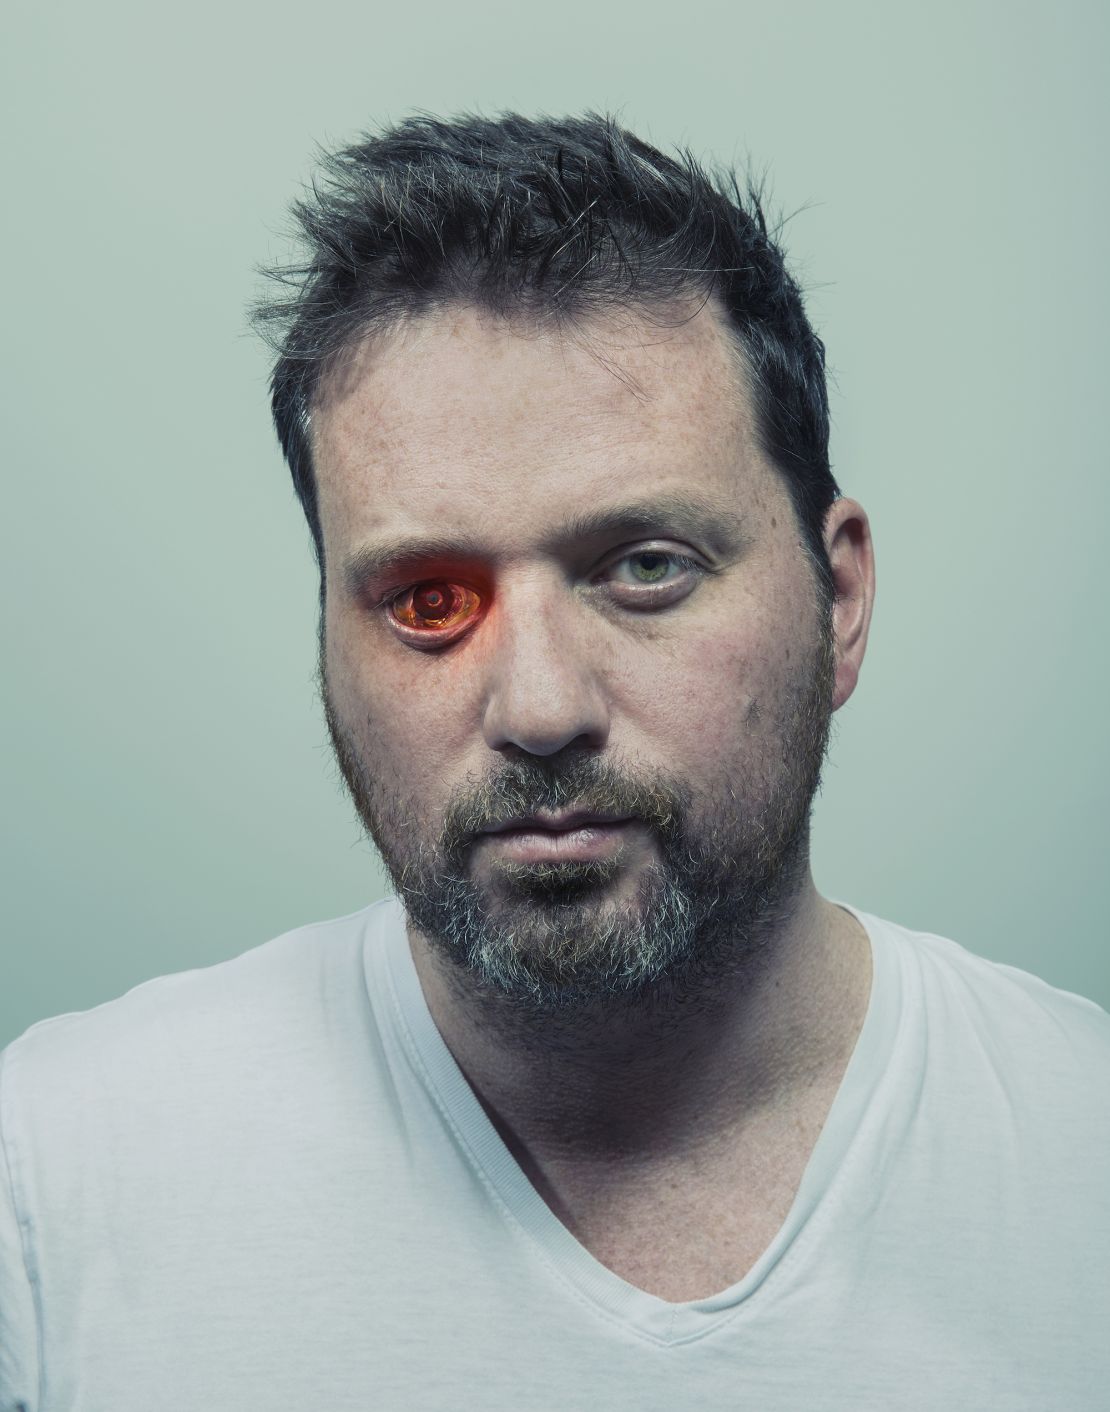 Describing himself as an "eyeborg," Rob Spence installed a wireless video camera in place of his right eye.